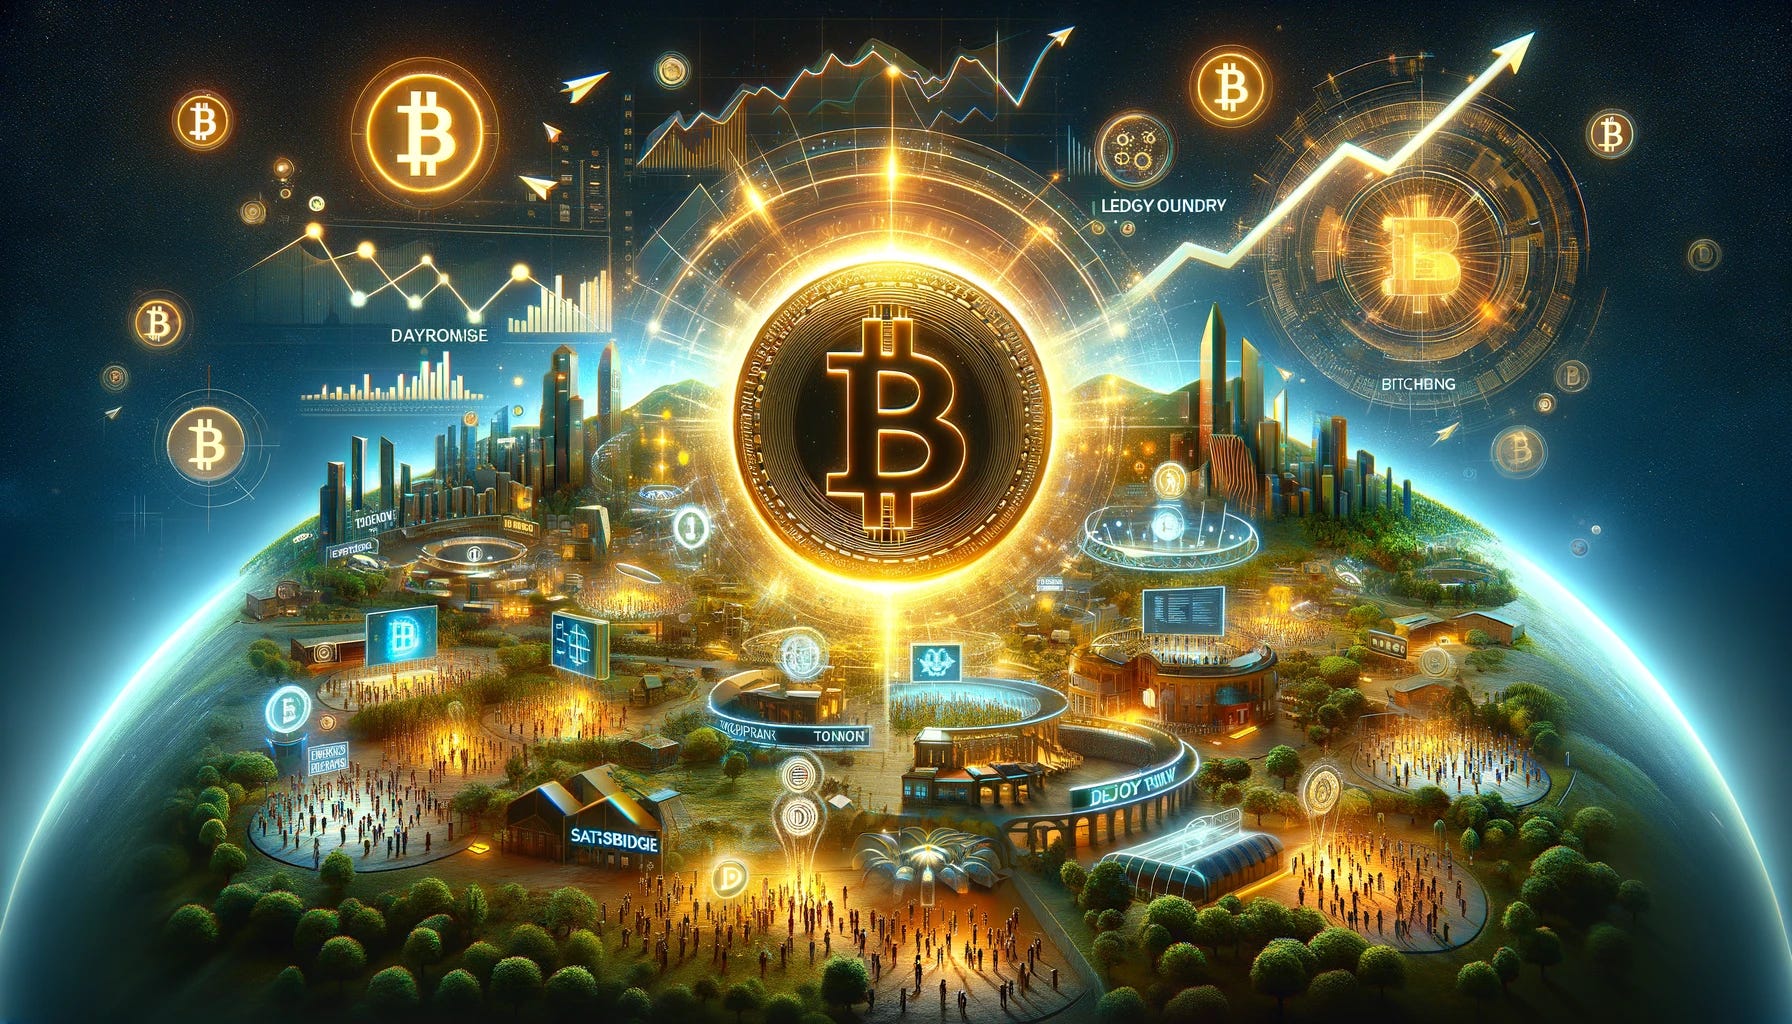 A digital art piece in landscape orientation, emphasizing the theme of growth in the context of KoiPond driving Bitcoin innovation. The central focus is a large, glowing symbol of Bitcoin, representing KoiPond's foundation on Bitcoin technology. Add dynamic elements like rising graphs or upward arrows around the Bitcoin symbol to symbolize growth. Surround this with vibrant and larger icons of 'Ledgy Yield' and 'SatsBridge', symbolizing their successful launches and growth. Include a prominent depiction of an airdrop event, with tokens descending towards a large group of people, illustrating investor growth and community expansion. The background features 'Fjord Foundry' and 'DeFiTankLand', shown as flourishing digital landscapes or cities, representing the thriving environment of these platforms. The overall atmosphere is dynamic and vibrant, visually representing growth, innovation, and the thriving ecosystem within the crypto sector. Adapt the layout to a wider perspective to enhance the narrative visually.